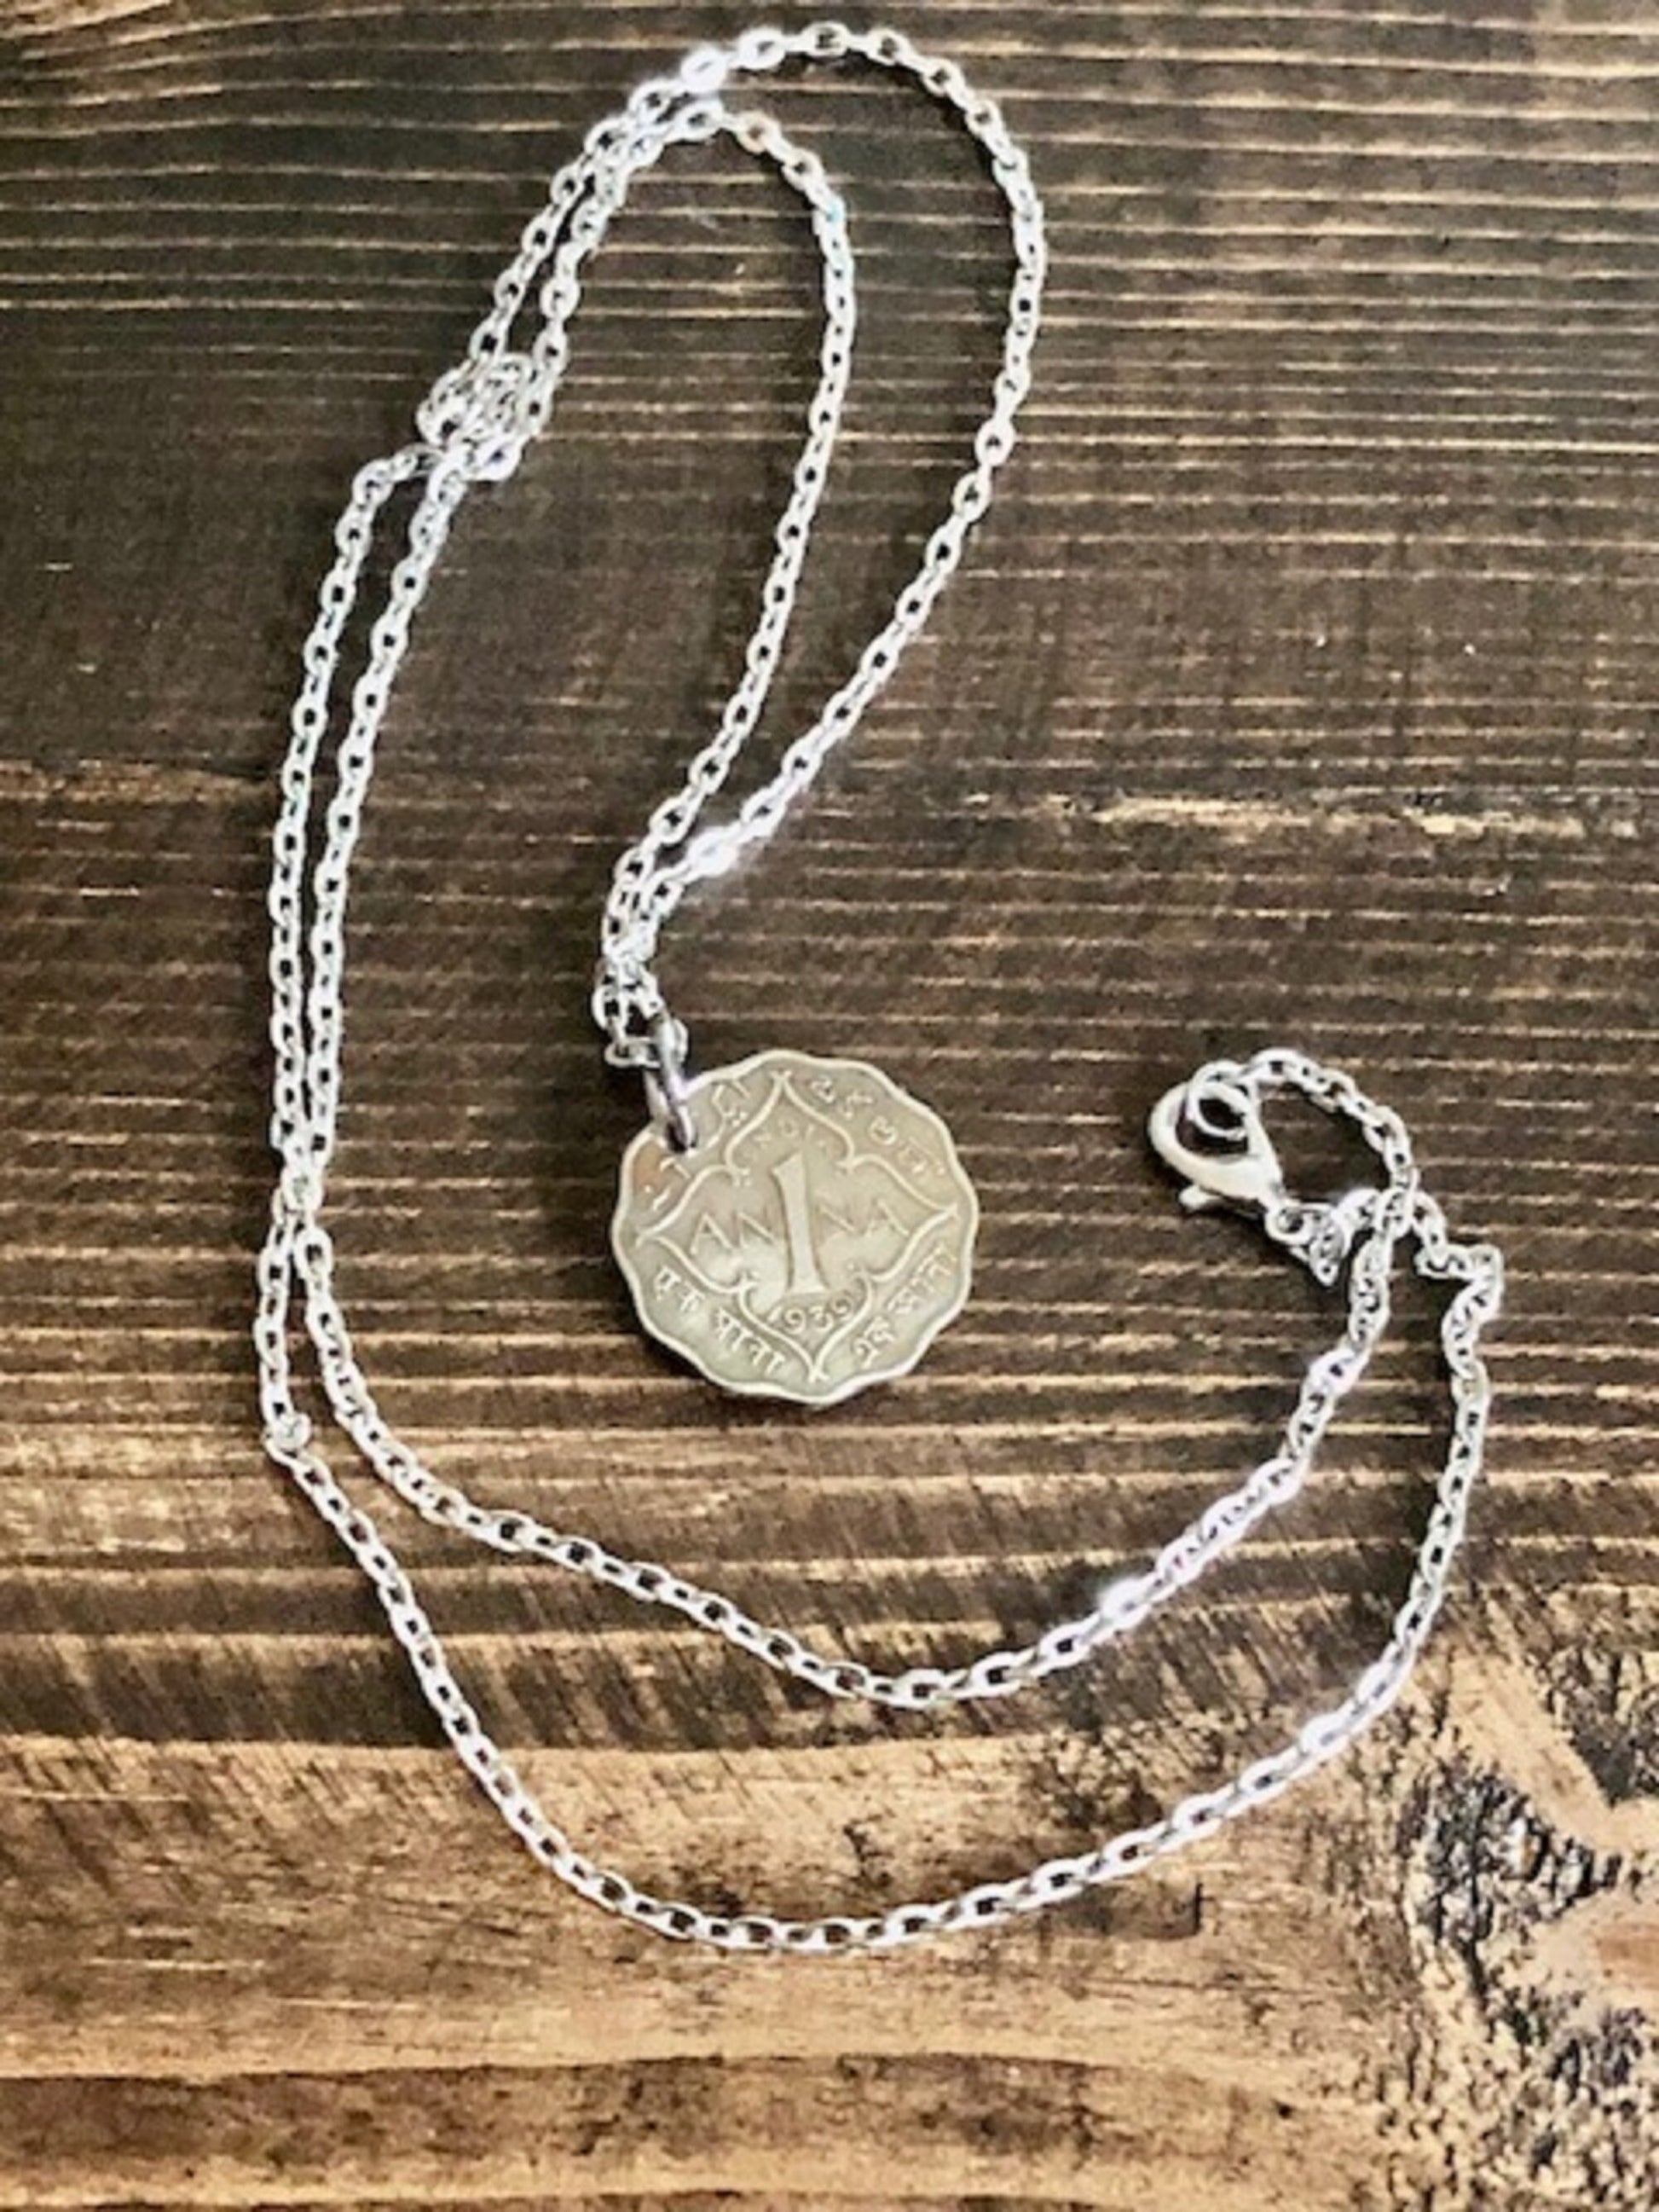 India Sri Lanka Coin Pendant 1 Anna Personal Necklace Old Vintage Handmade Jewelry Gift Friend Charm For Him Her World Coin Collector